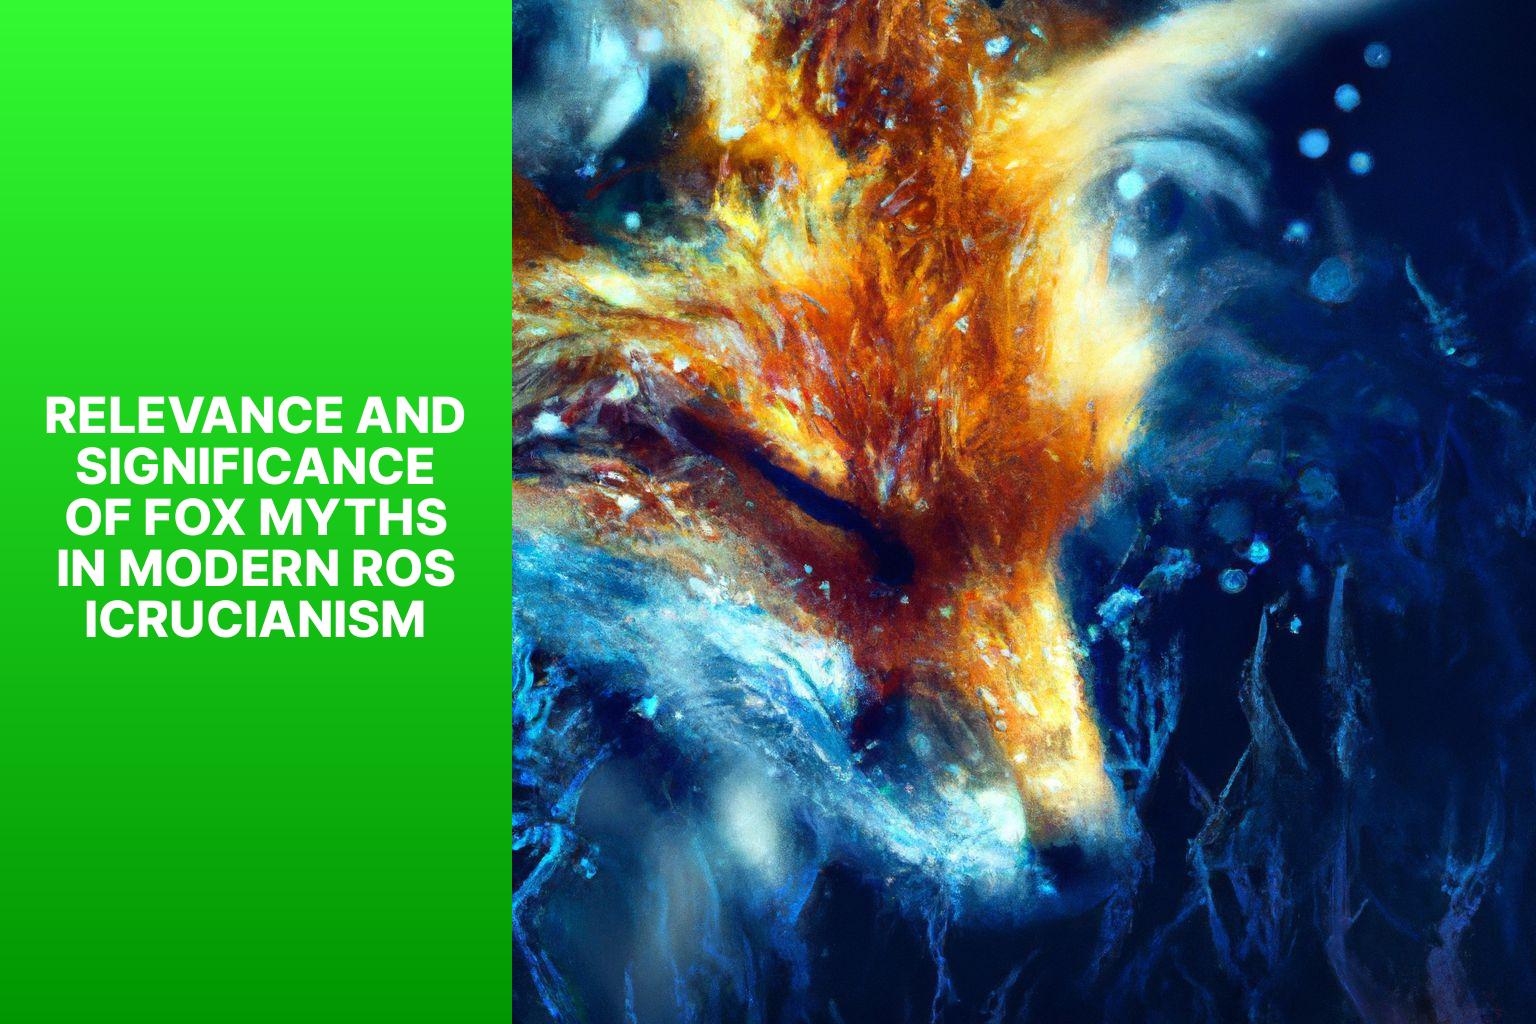 Relevance and Significance of Fox Myths in Modern Rosicrucianism - Fox Myths in Rosicrucianism 